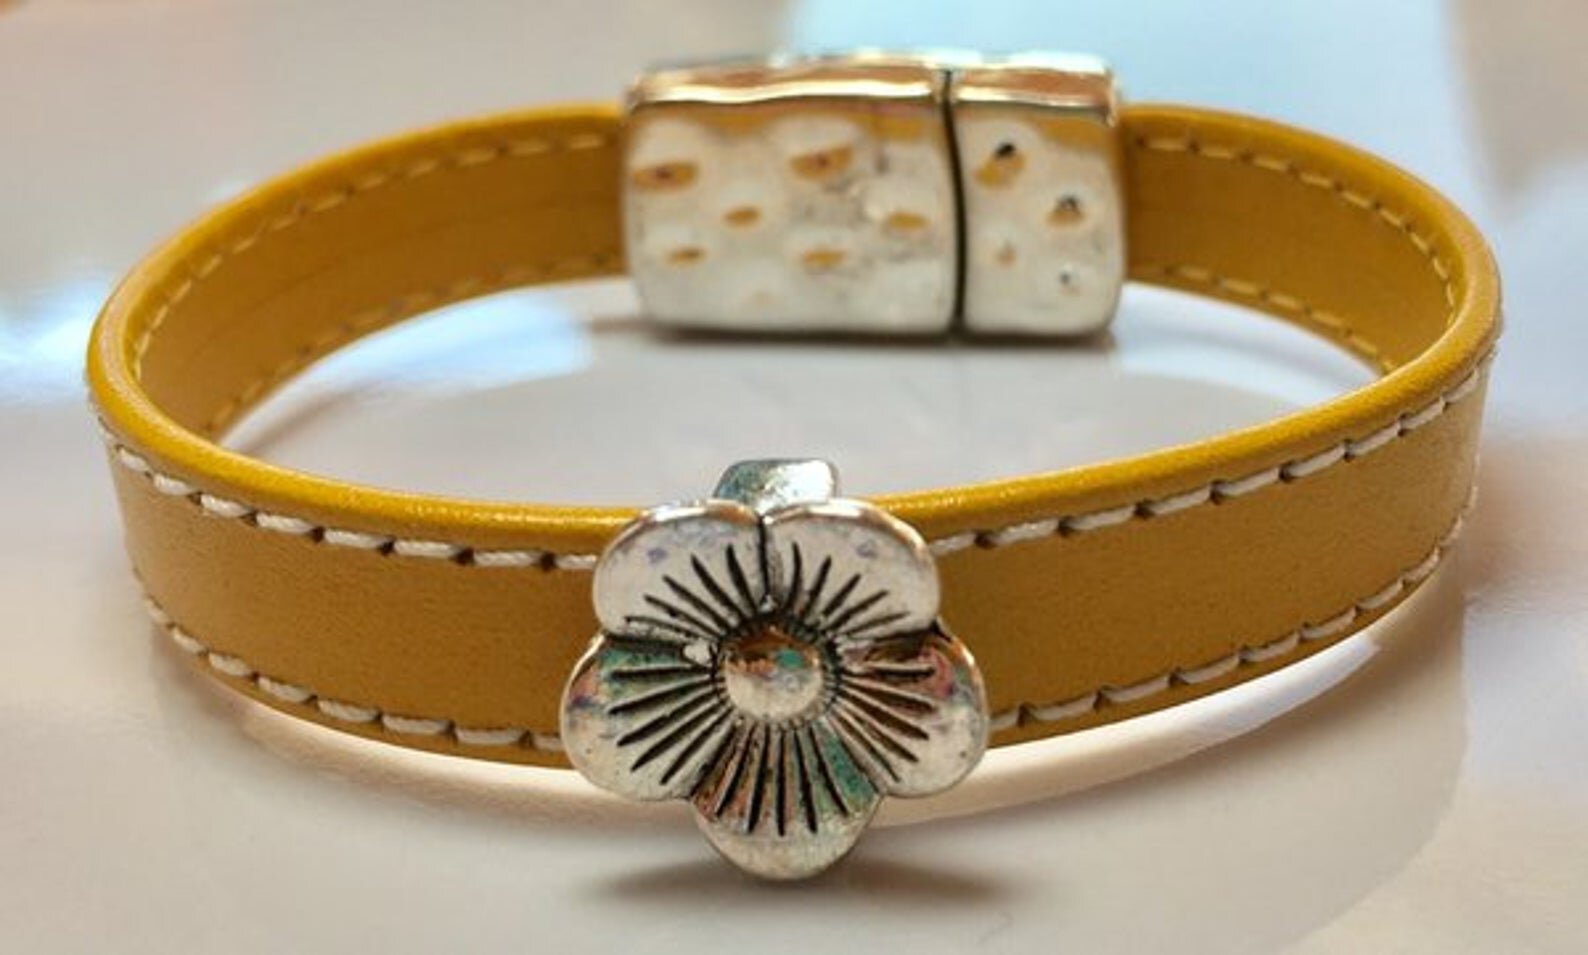 Pellarte Stitched Italian Leather Bracelet with Buttercup Bead and